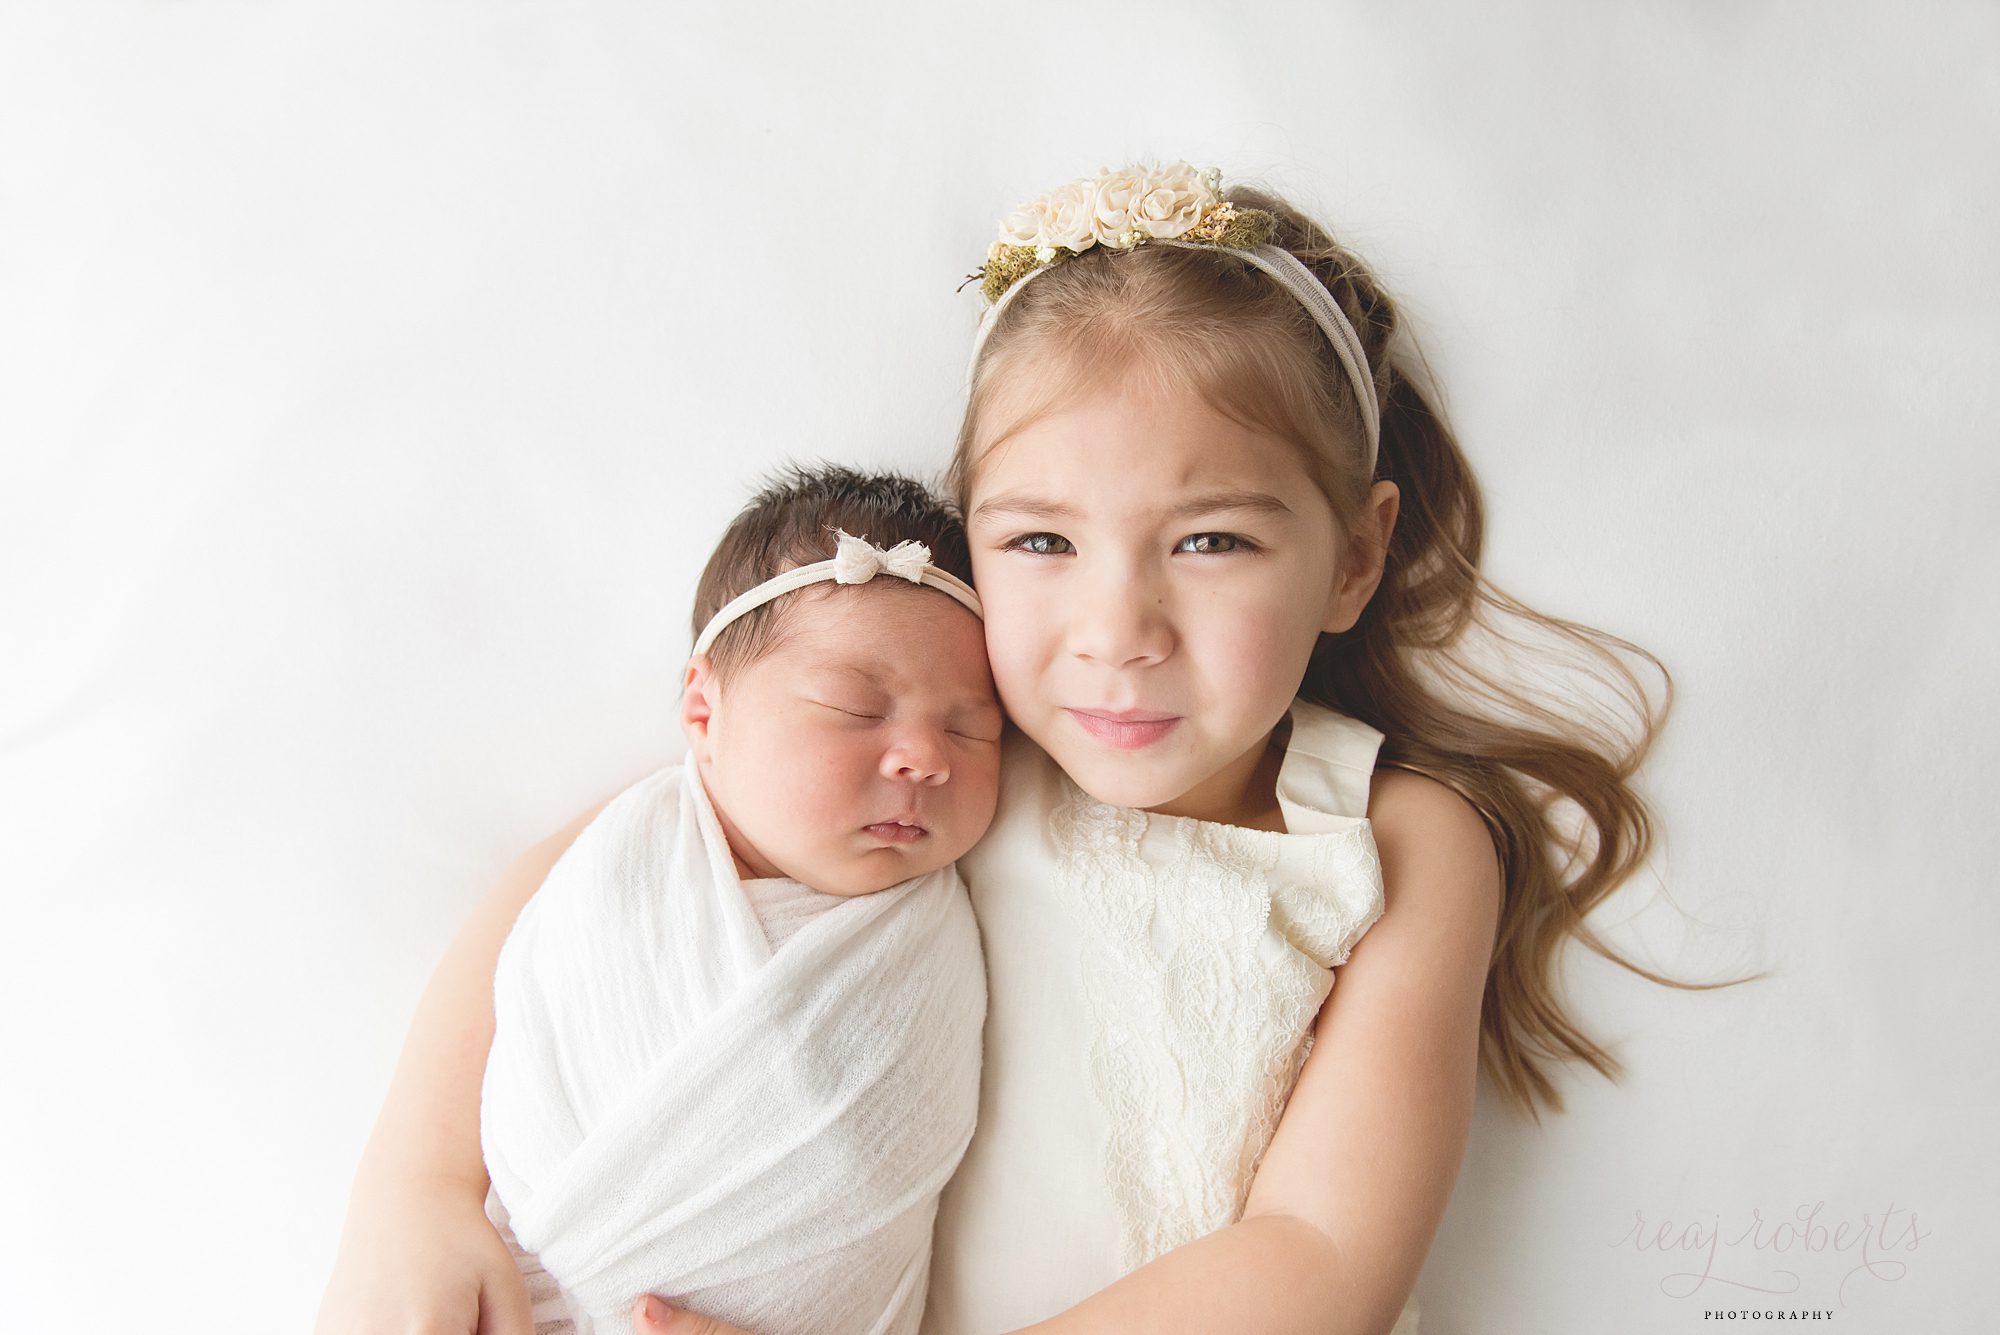 Chandler Baby Photographer | Reaj Roberts Photography | newborn with older sister laying down pose